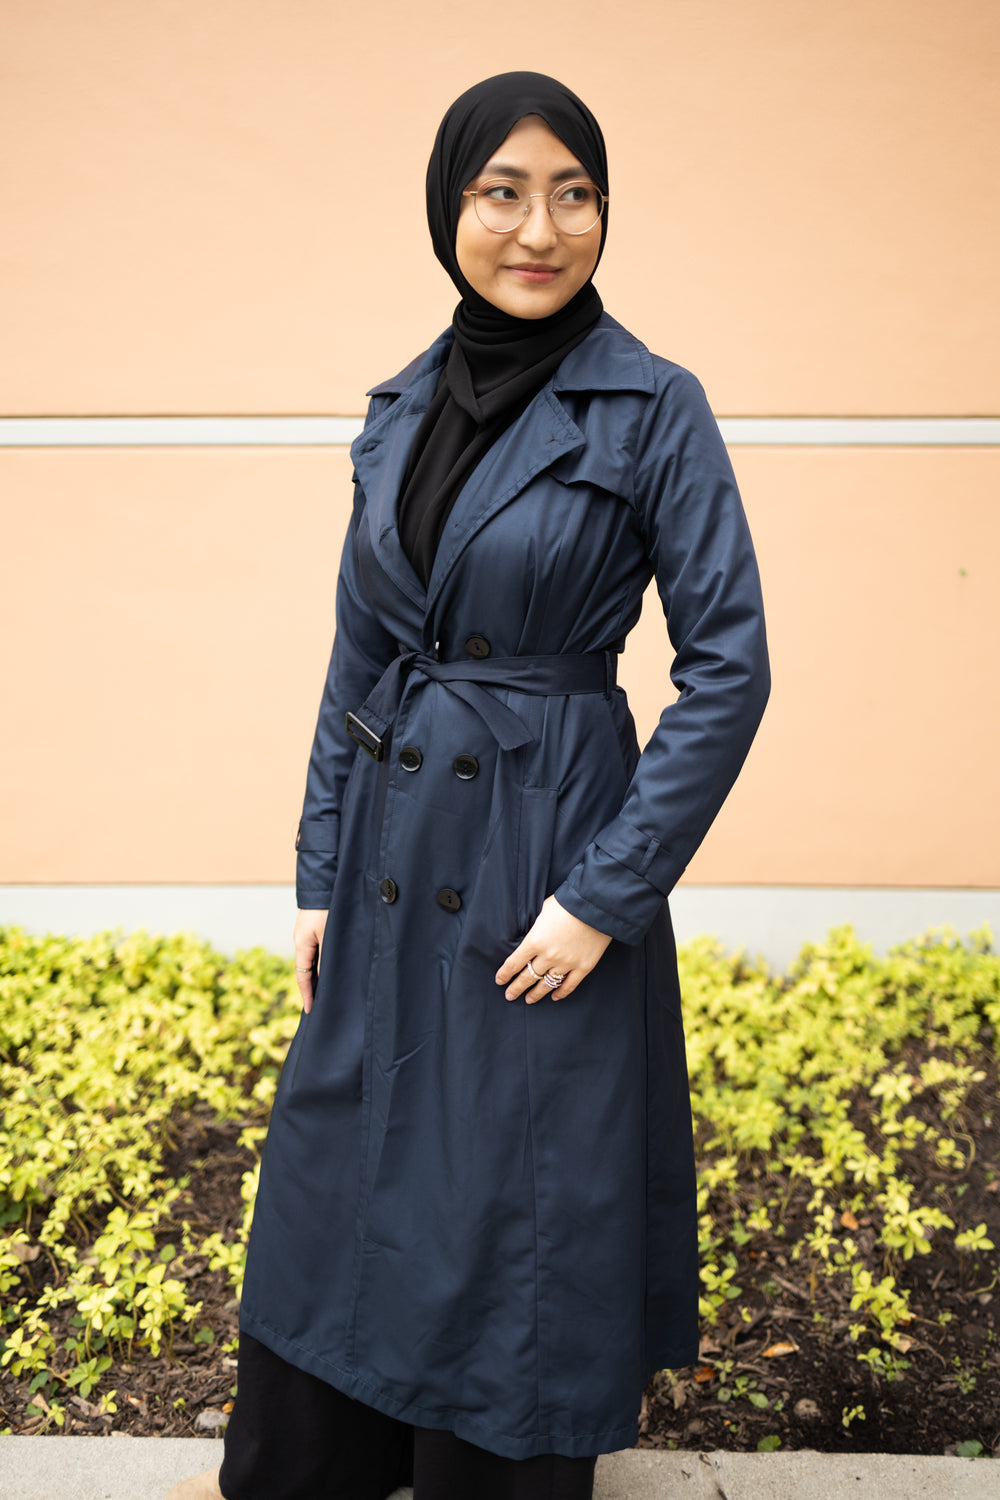 asian muslim woman wearing a black hijab and outfit with a navy blue maxi trench coat with black buttons